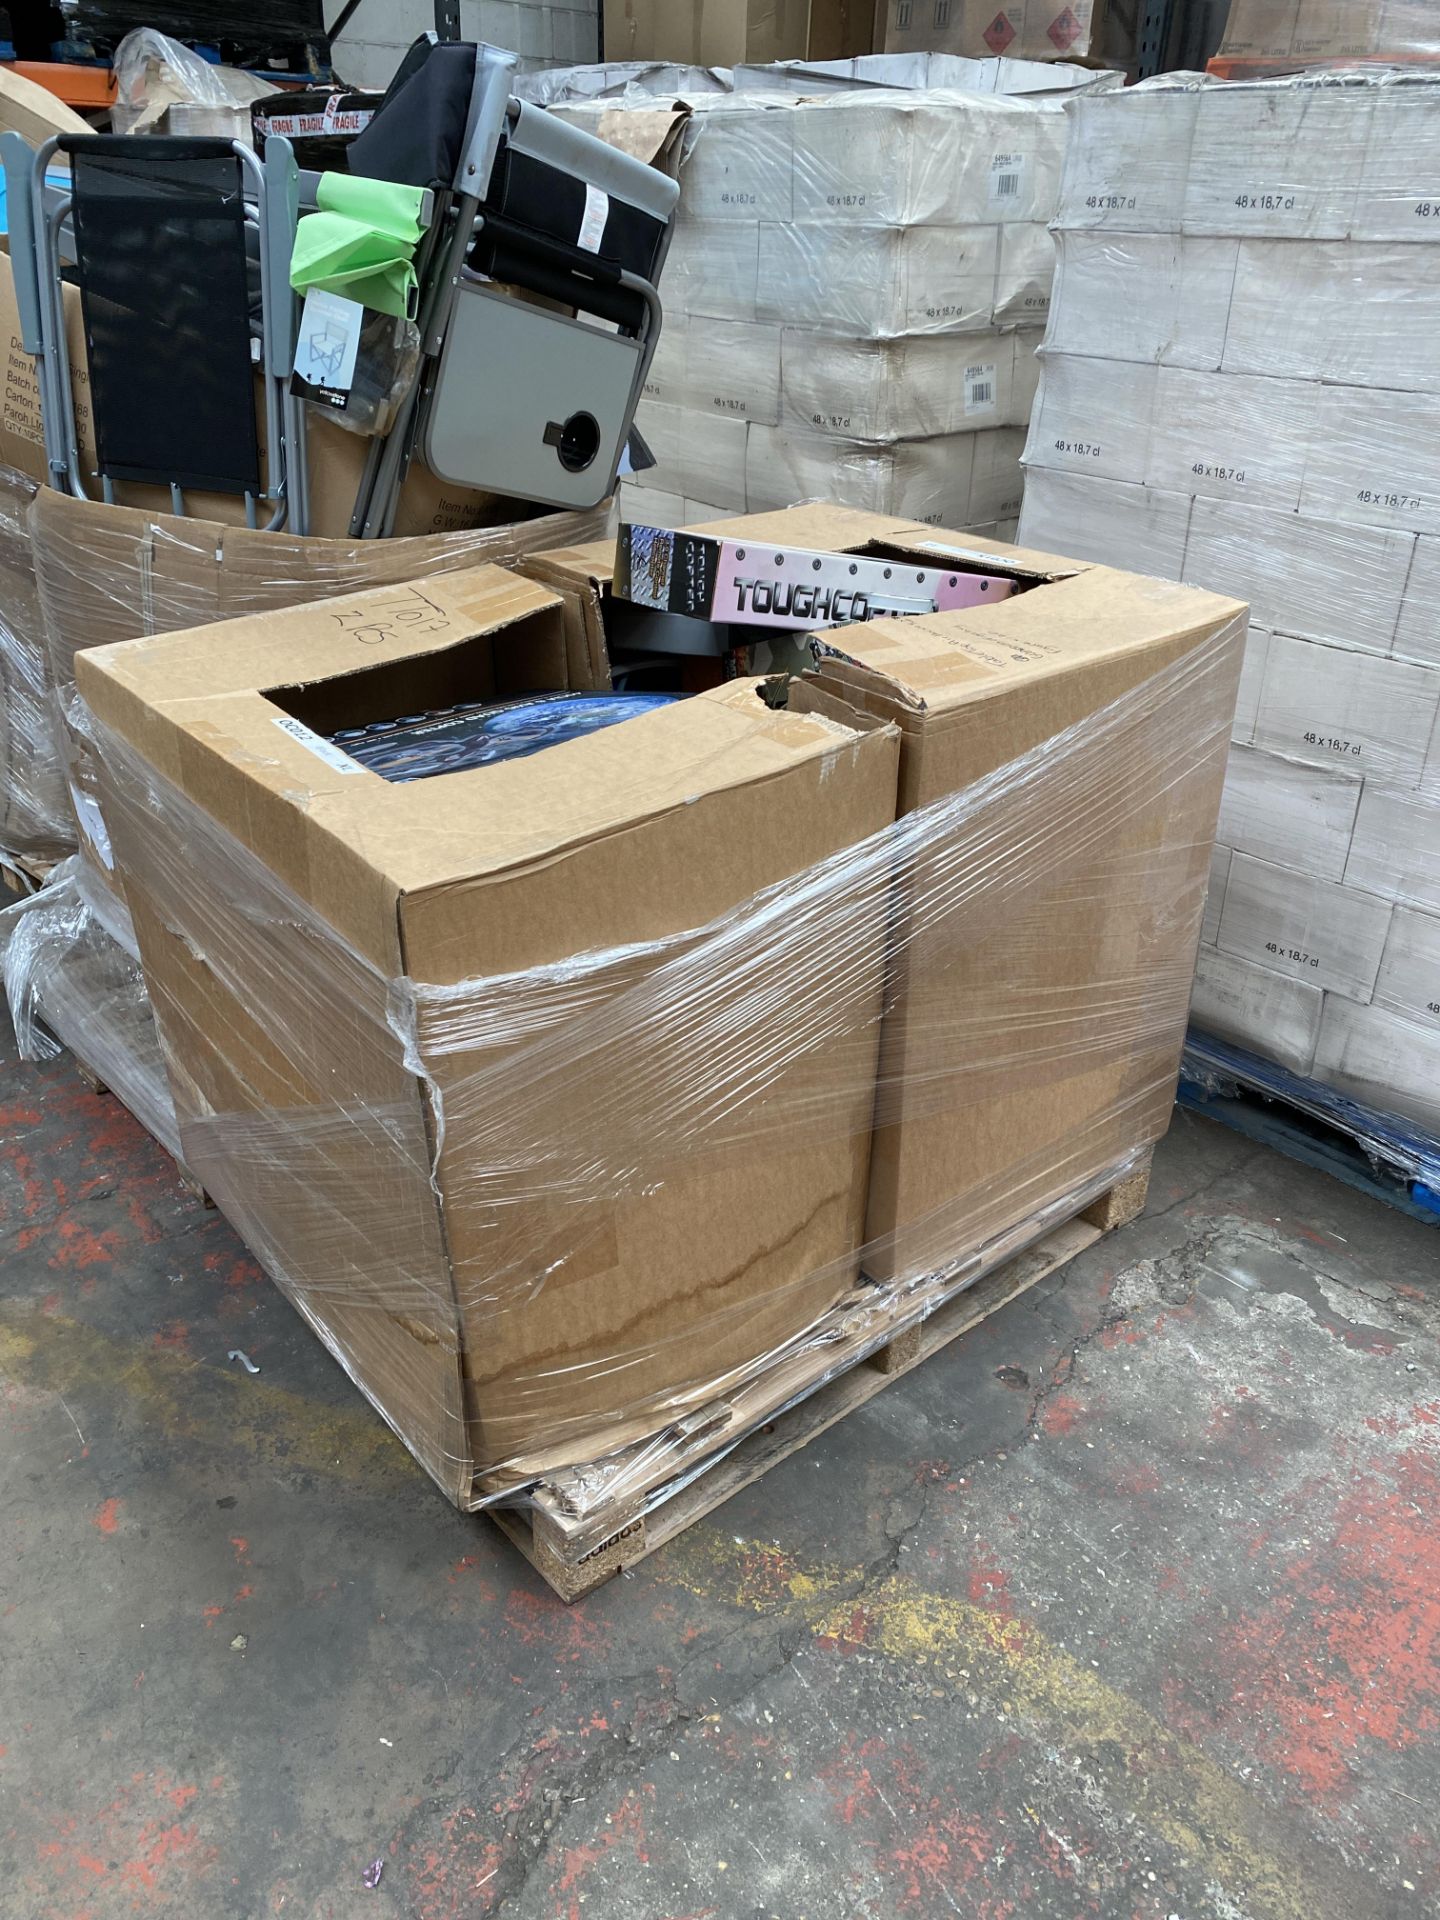 1 x pallet containing toys. Some new some returns. Pallet containing remote control vehicles,